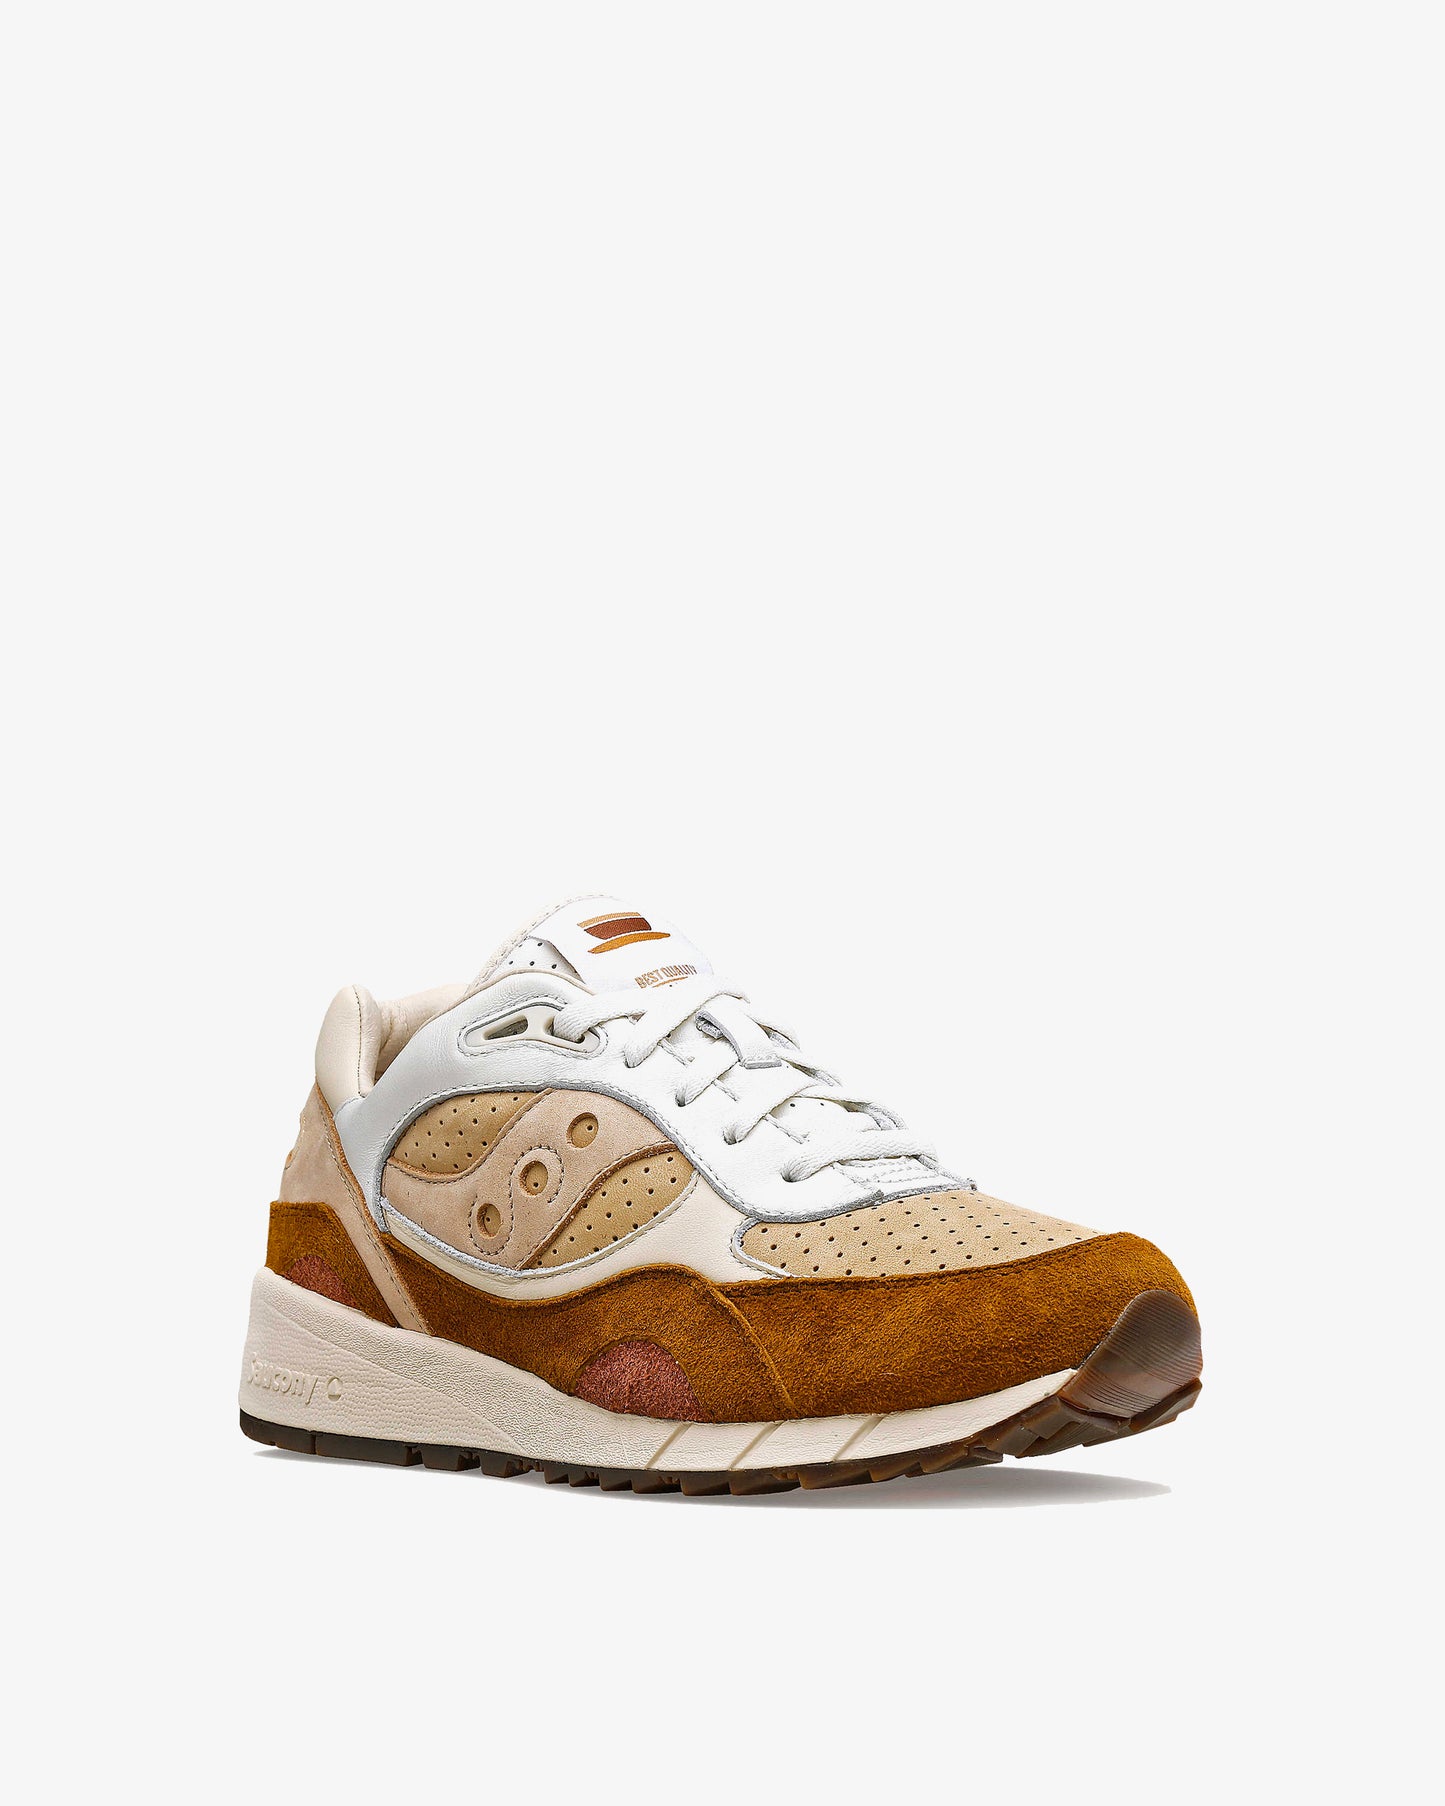 Saucony Shadow 6000 "Coffee Pack" Capuccino